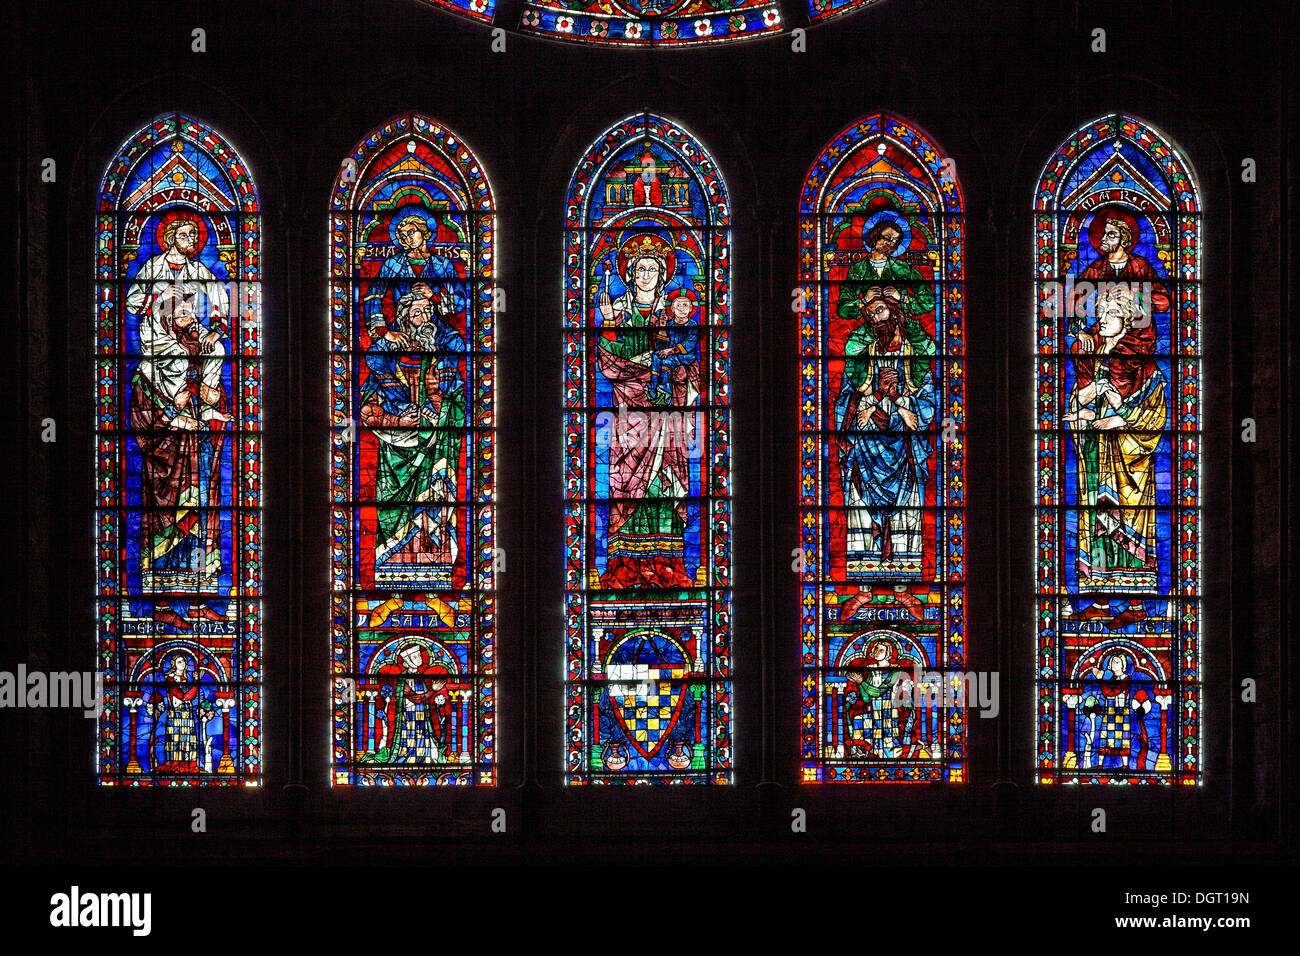 Chartres Cathedral, windows in the south transept, Ile de France region, department of Eure-et-Loir, France, Europe Stock Photo